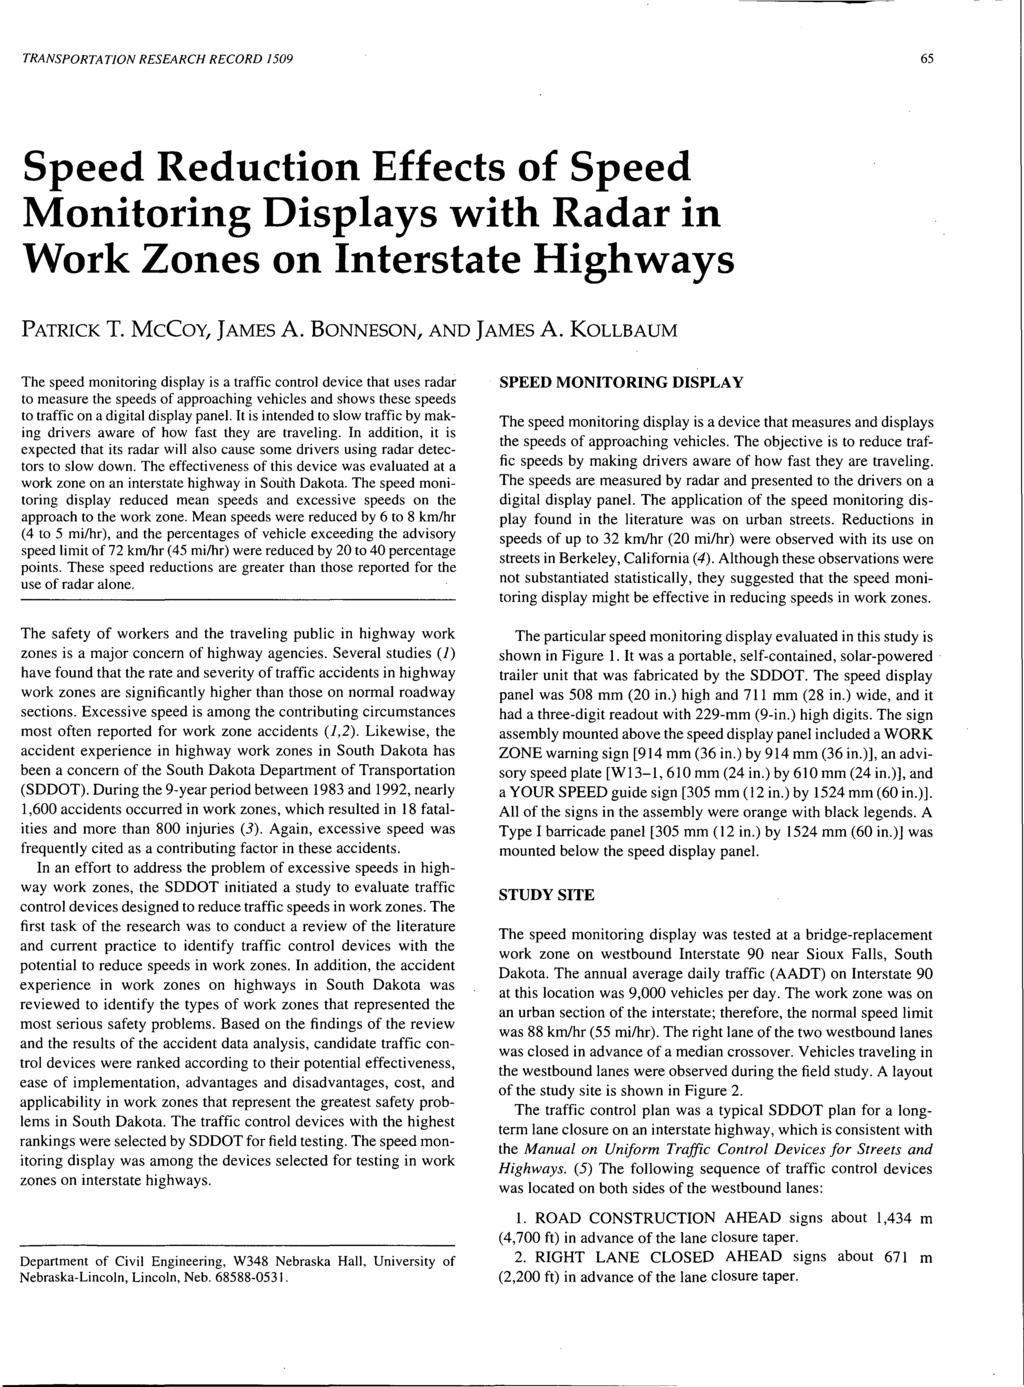 TRANSPORTATION RESEARCH RECORD 159 65 Speed Reduction Effects of Speed Monitoring Displays with Radar in Work Zones on Interstate Highways PATRICK T. McCOY, JAMES A. BONNESON, AND JAMES A.